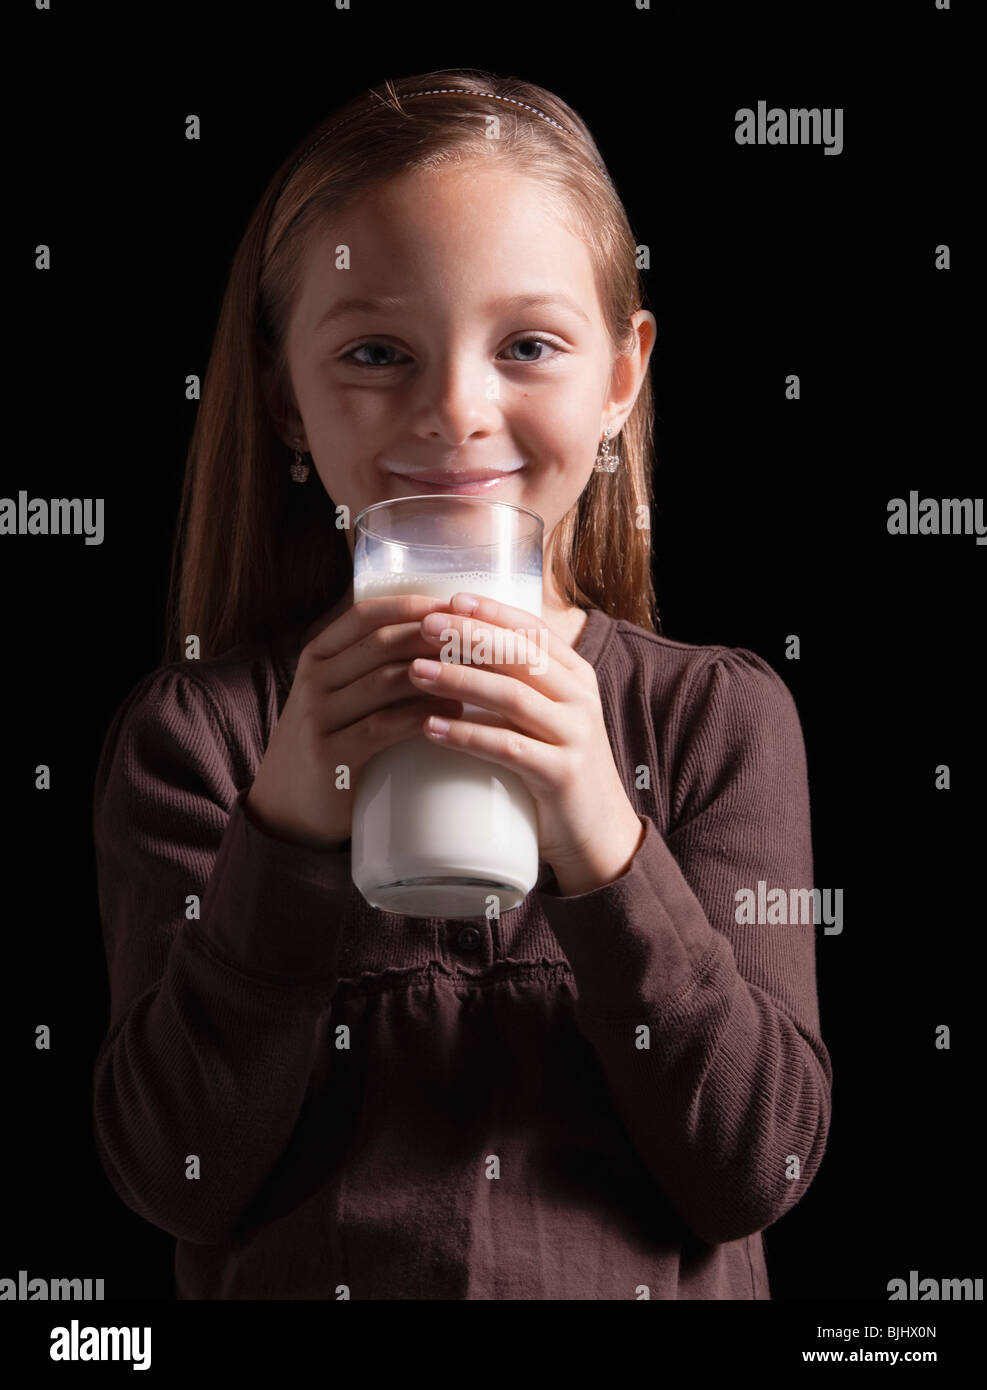 Young girl drinking glass of milk Stock Photo